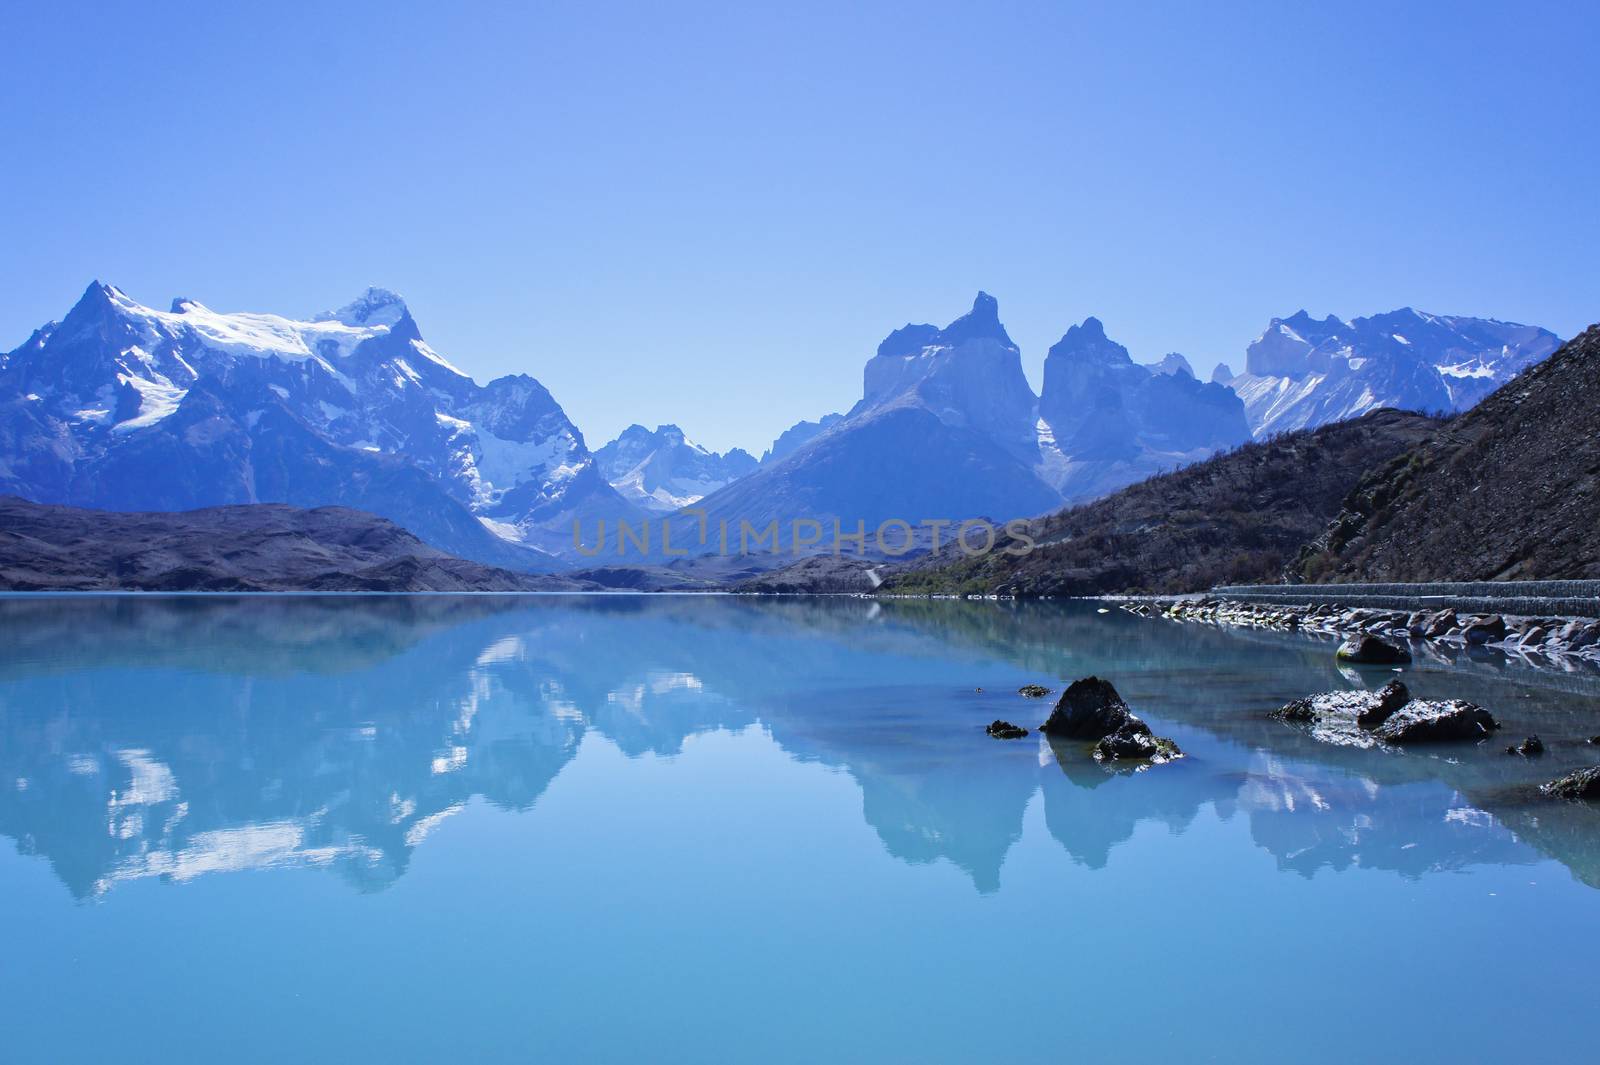 Torres del Paine National Park. Reflection on the lake. On the right, the aftermath of 2011 fire